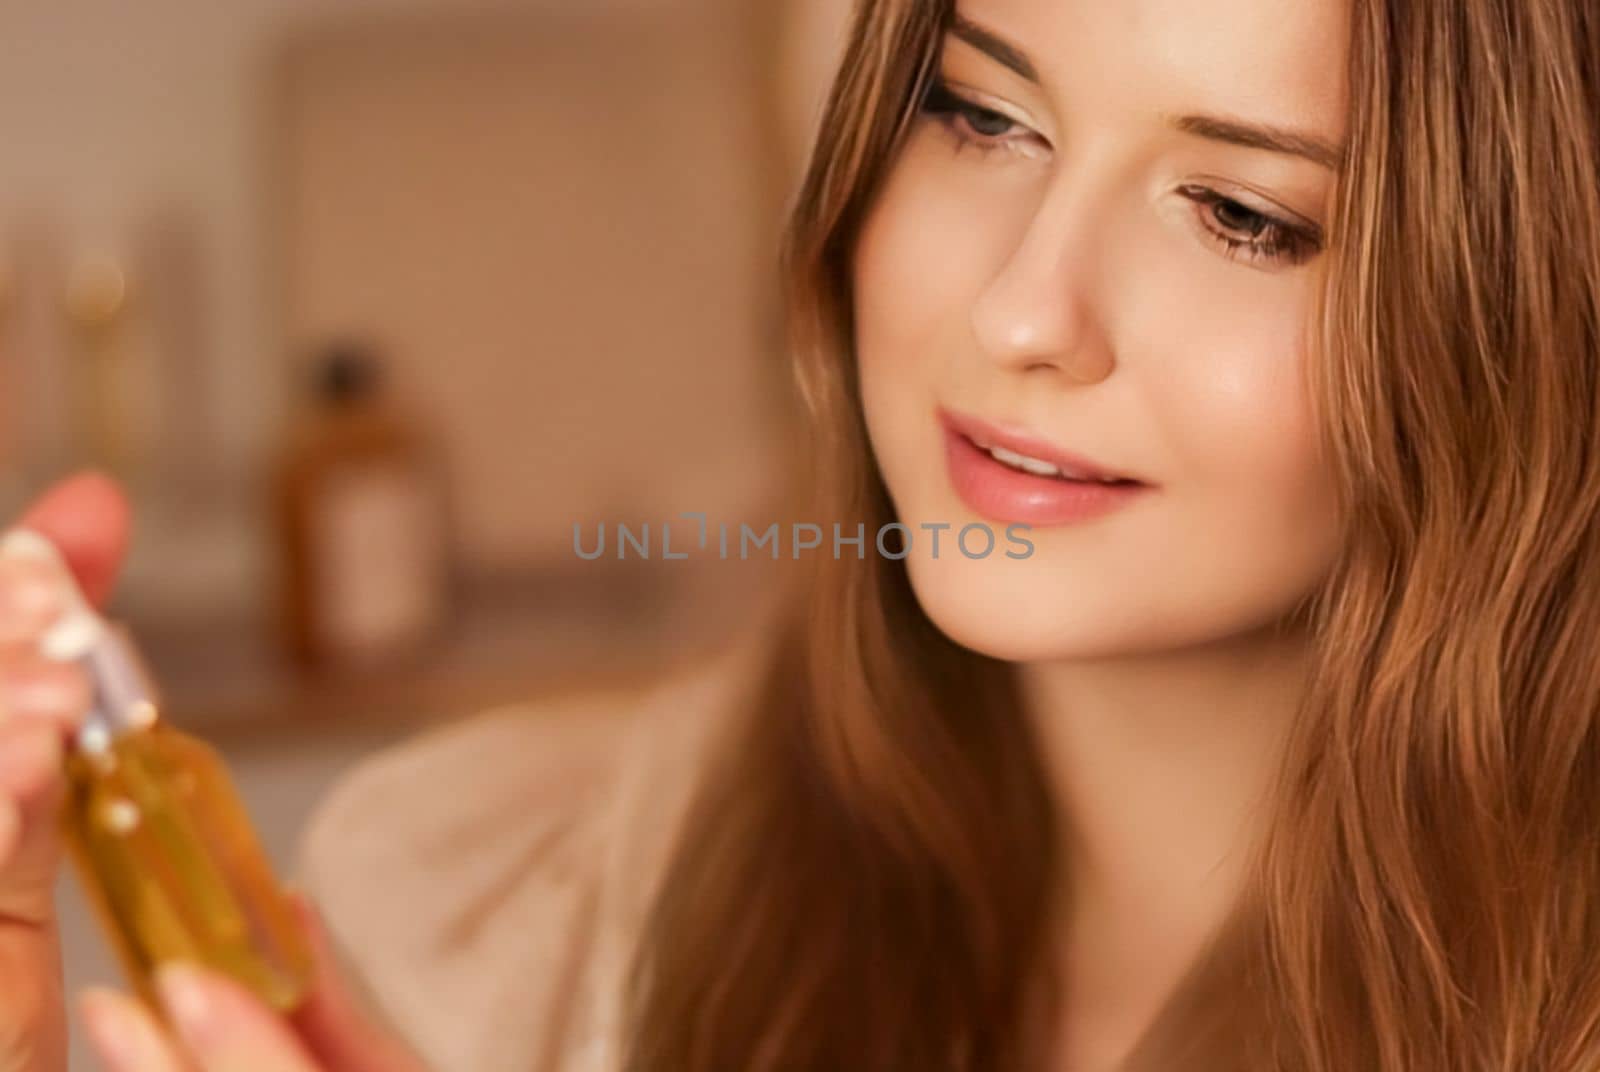 Beautiful woman with organic oil serum bottle, evening beauty and skincare routine by Anneleven